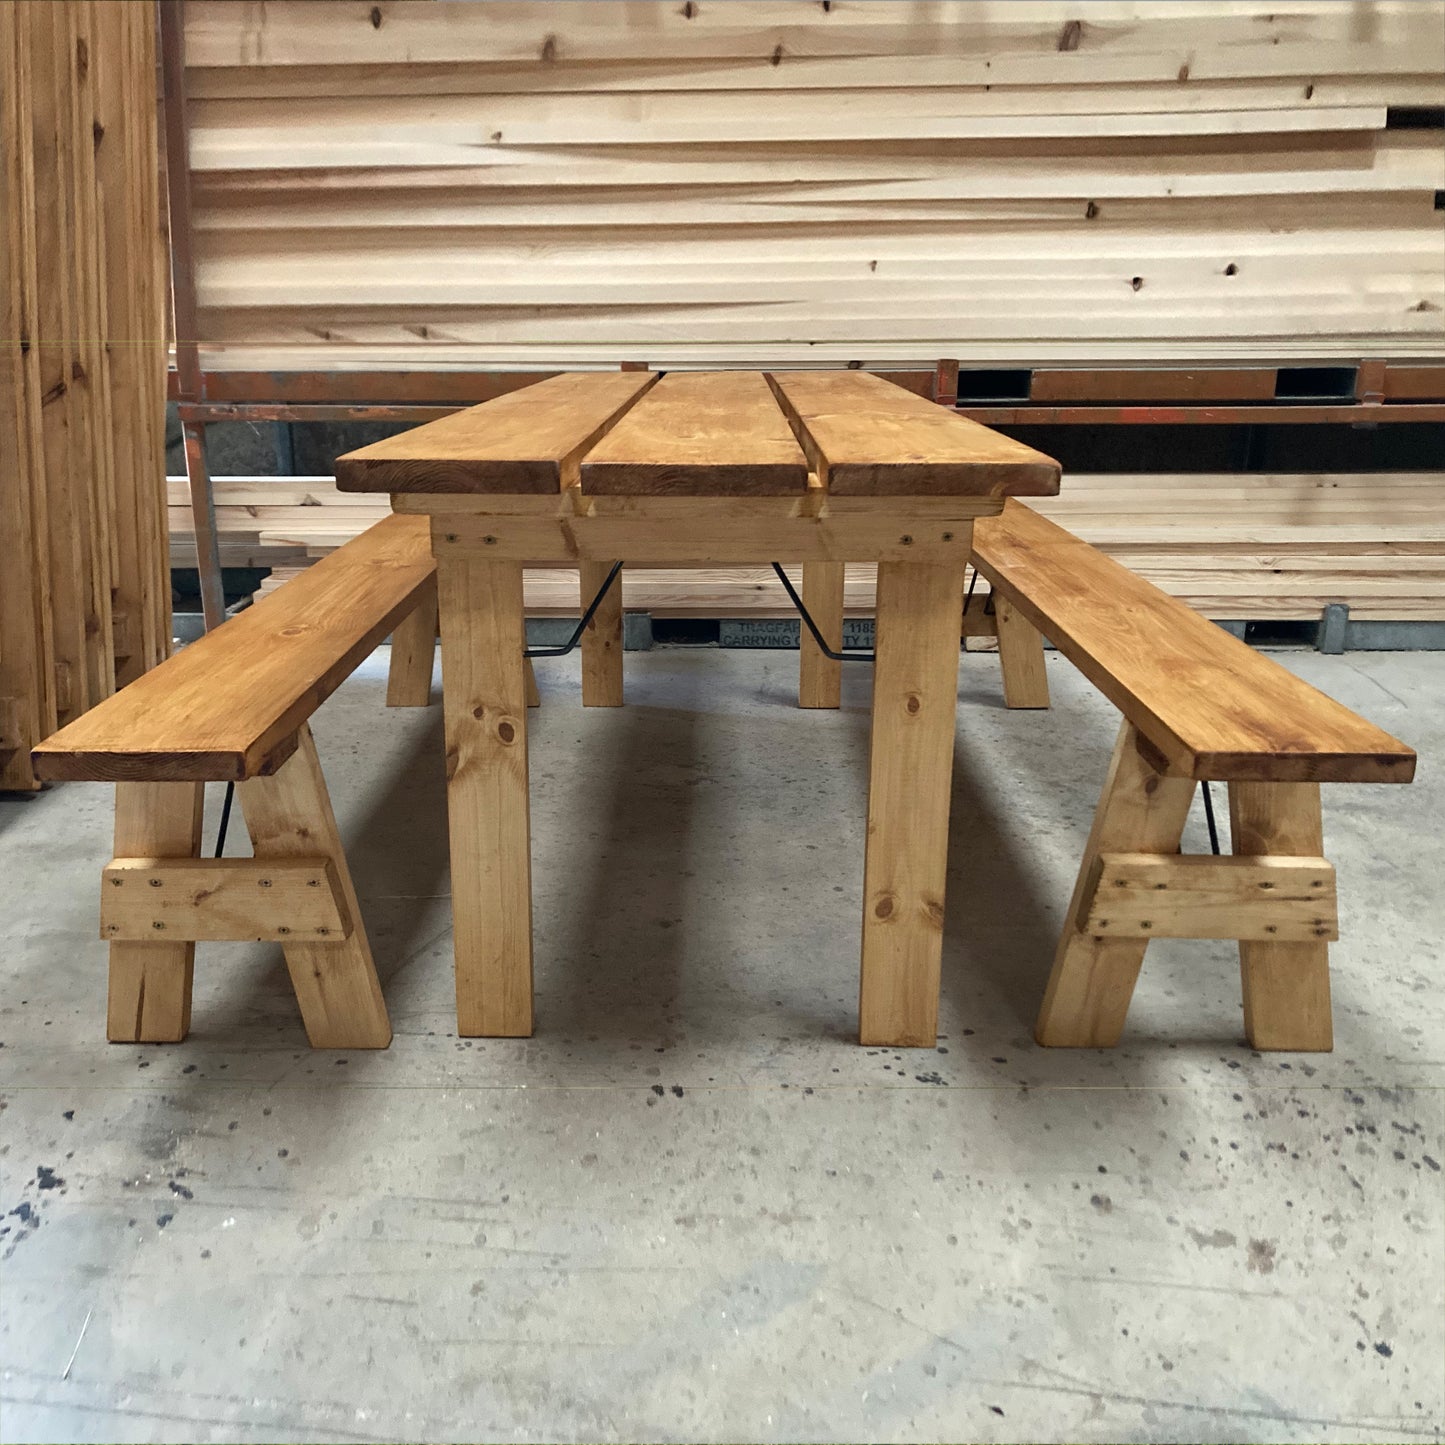 3. Indoor Folding Rustic-style Bench